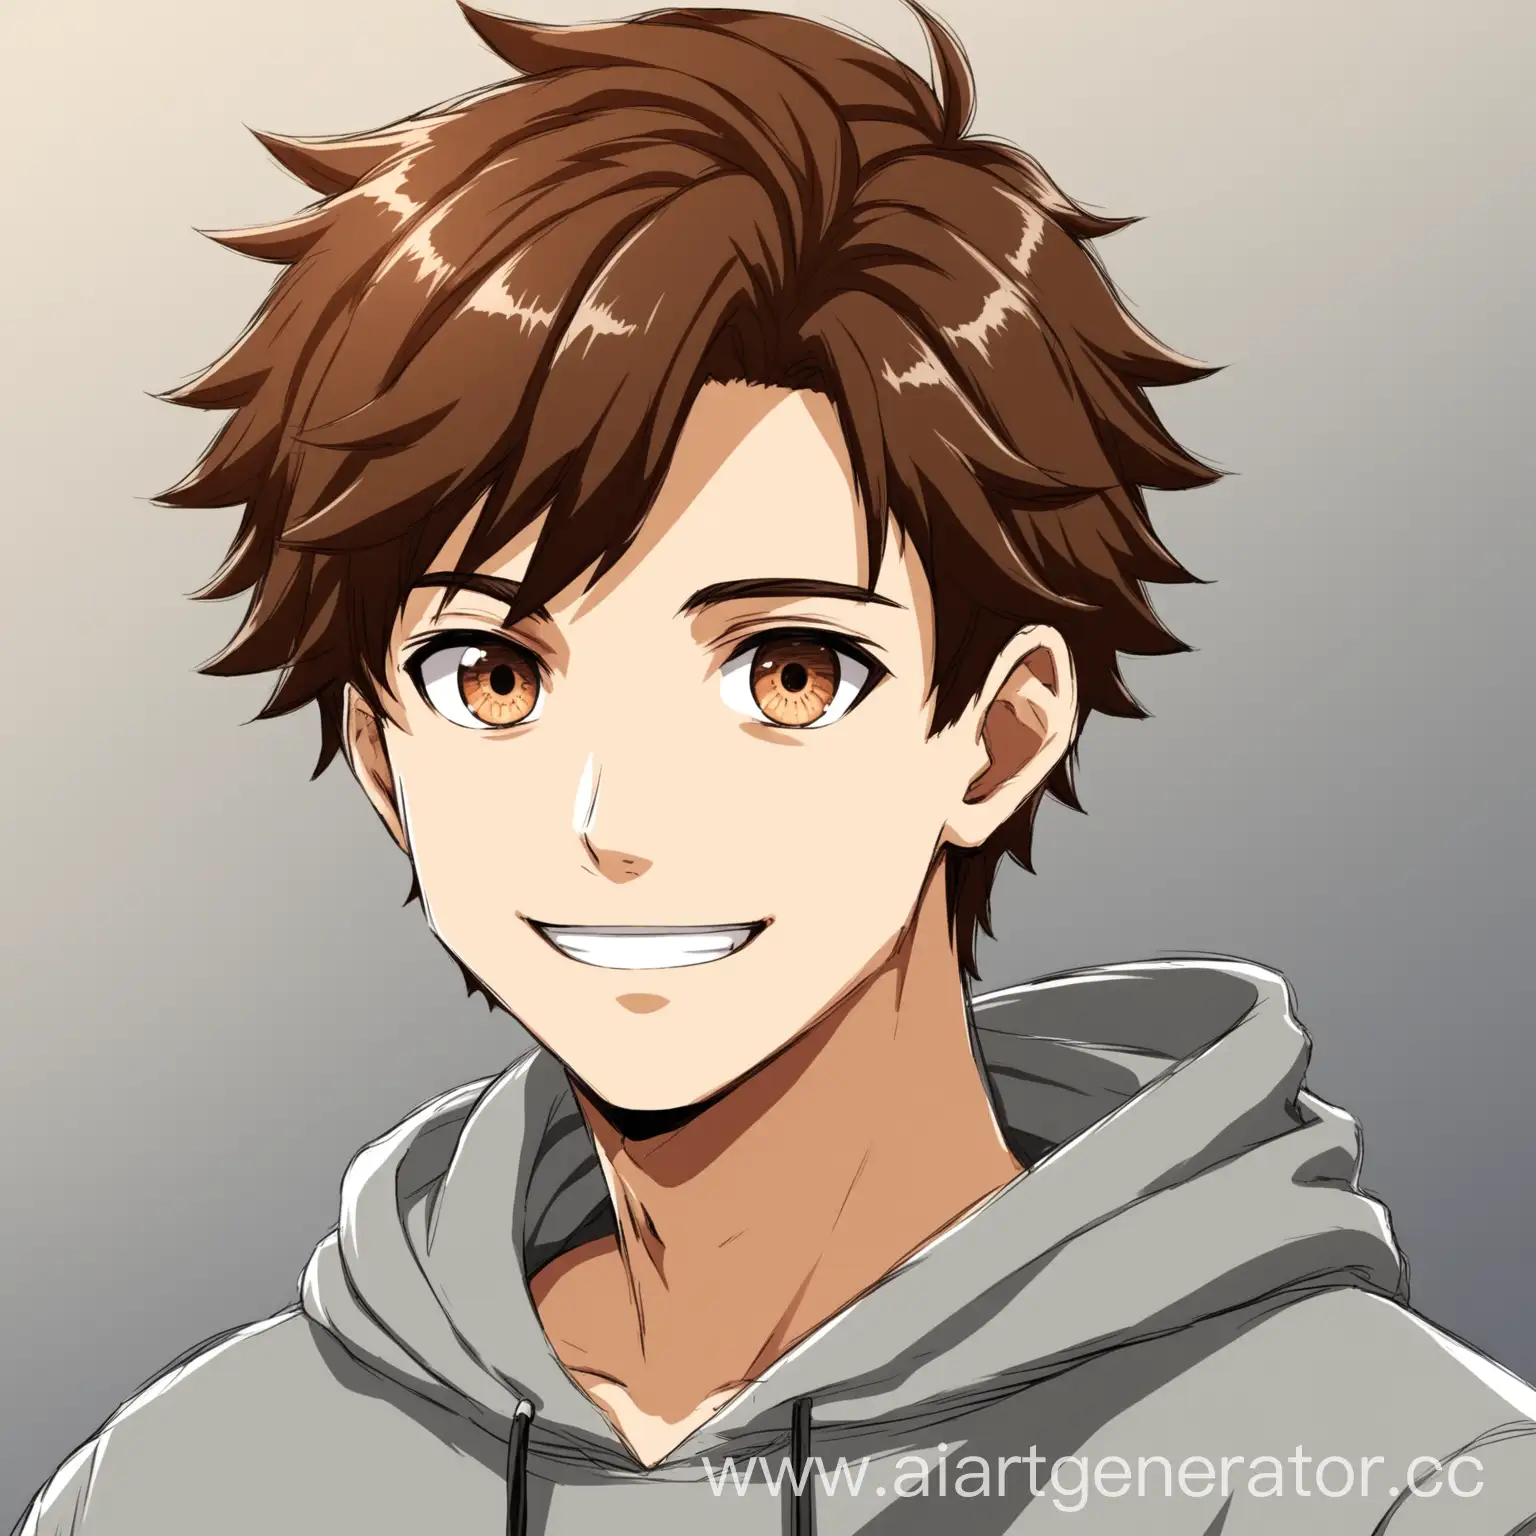 Young-Man-in-Anime-Style-Gray-Hoodie-Smiling-with-Like-Gesture